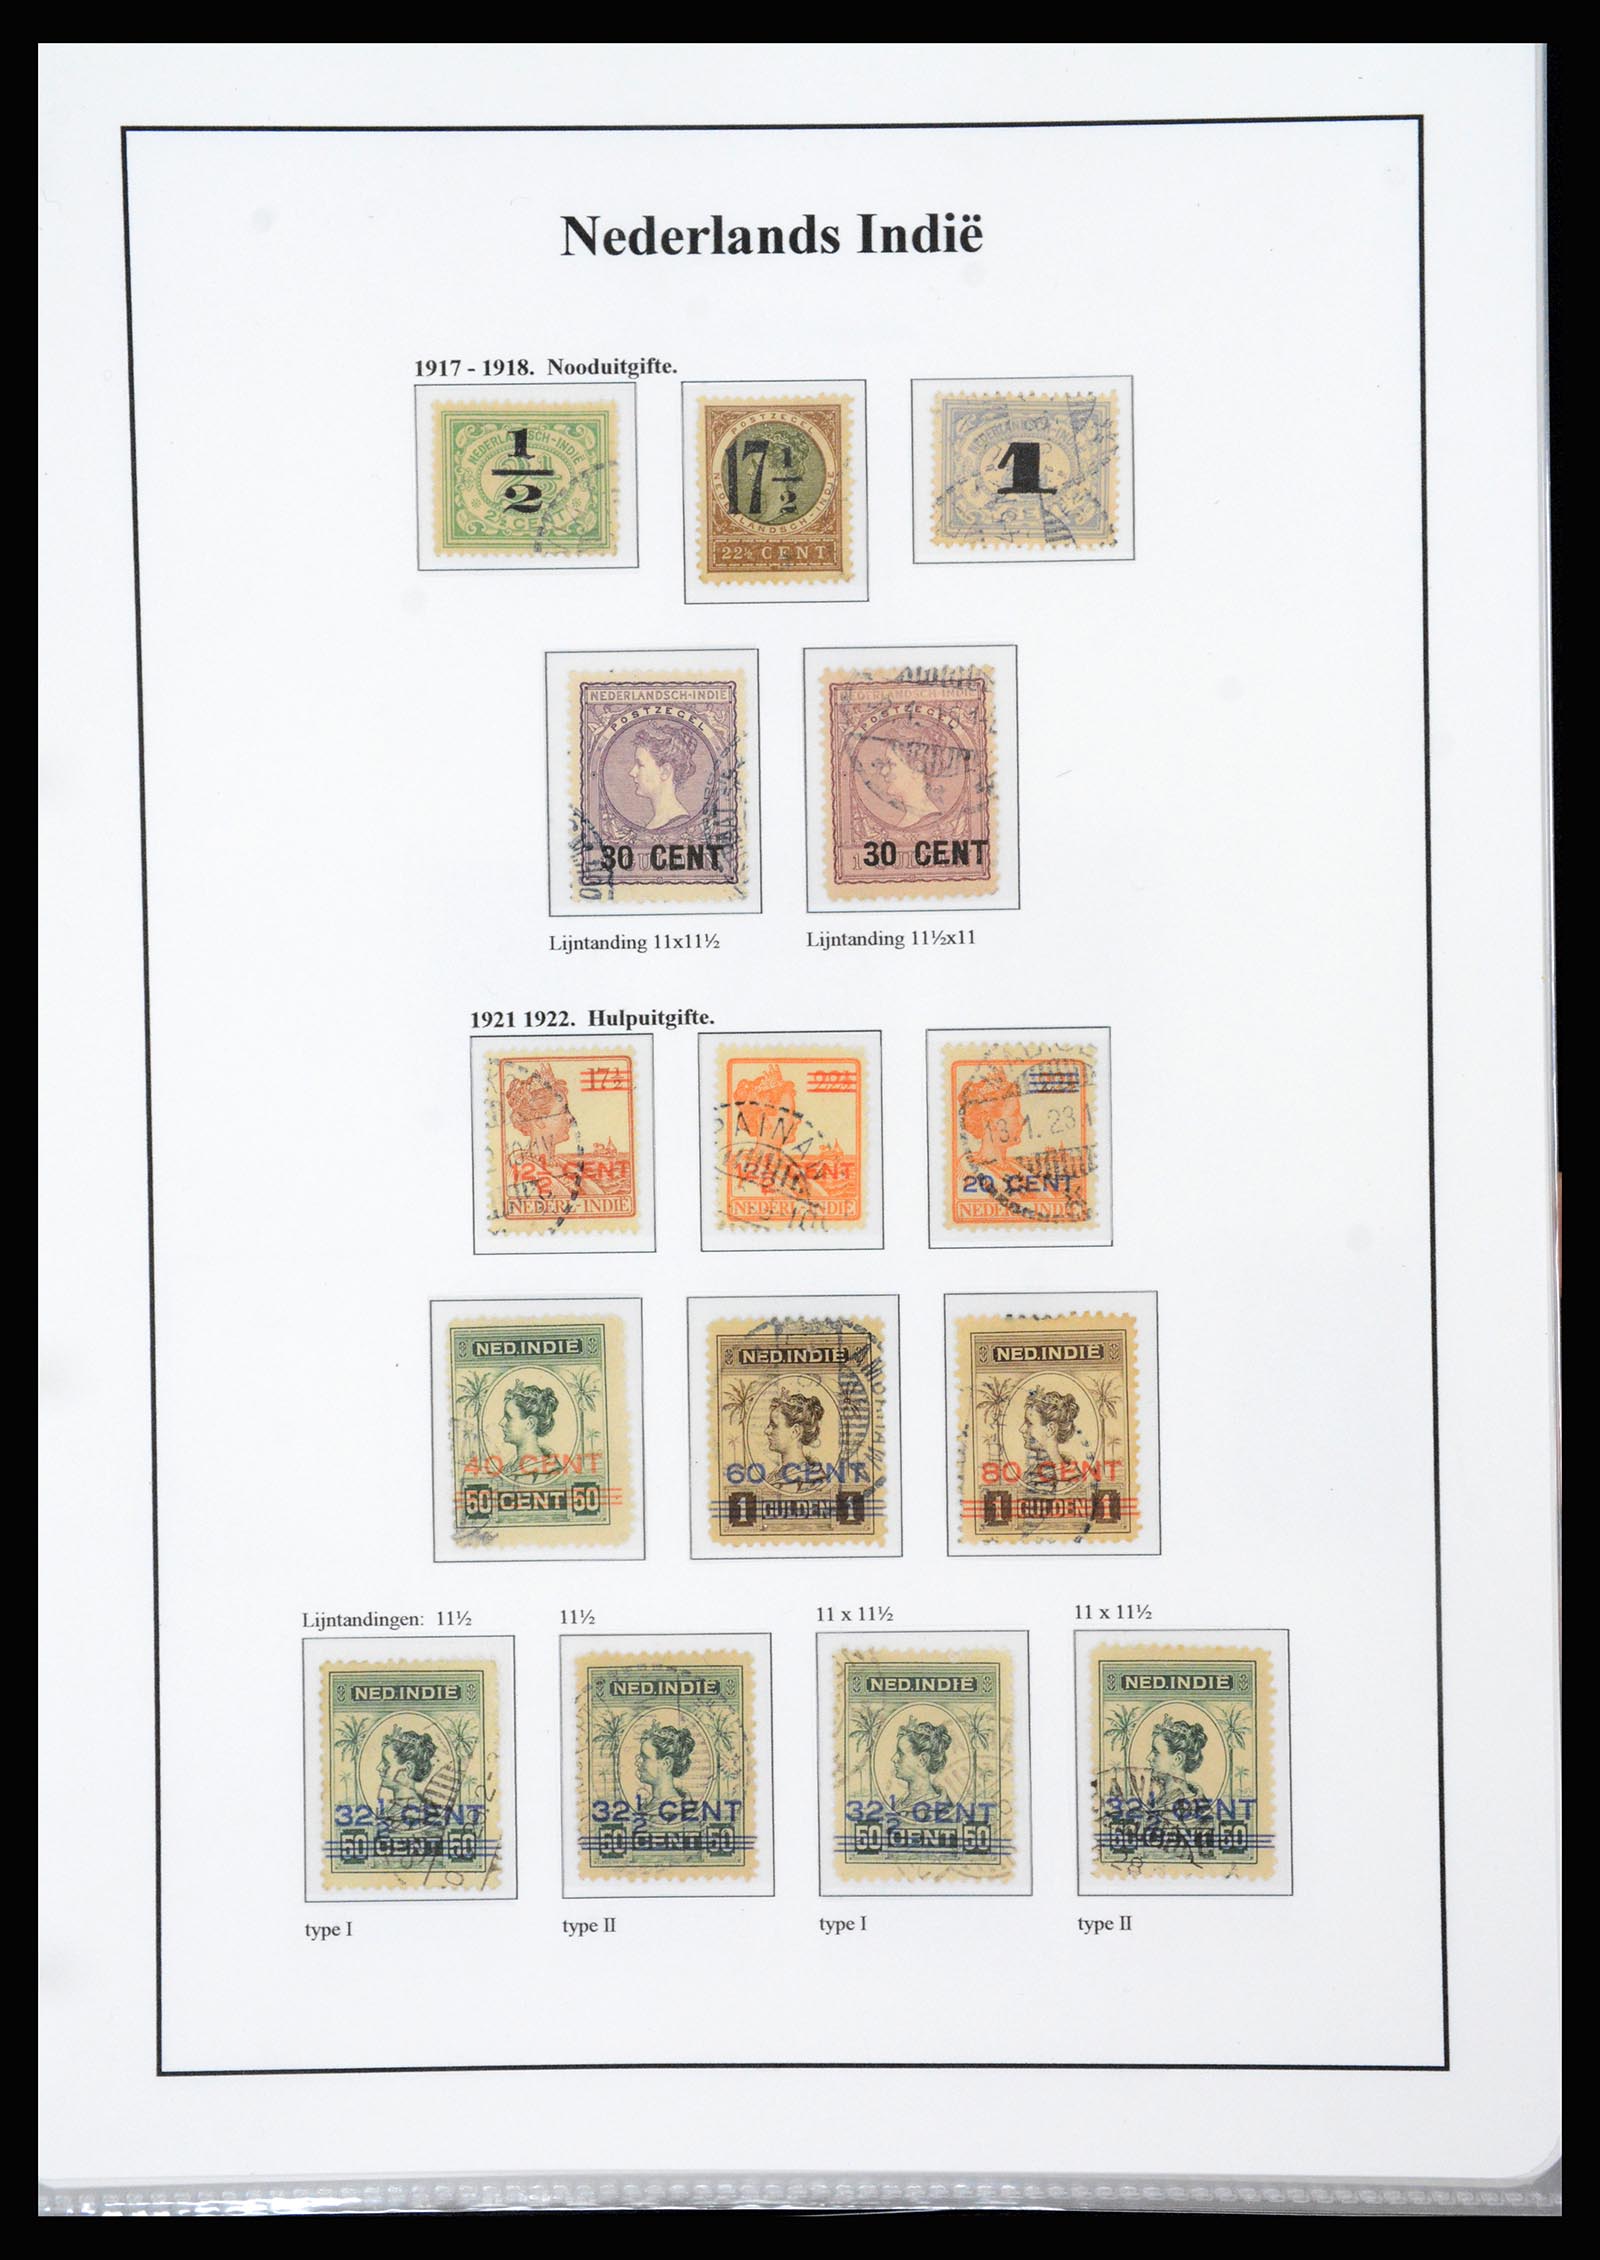 37247 012 - Stamp collection 37247 Dutch east Indies 1864-1949.